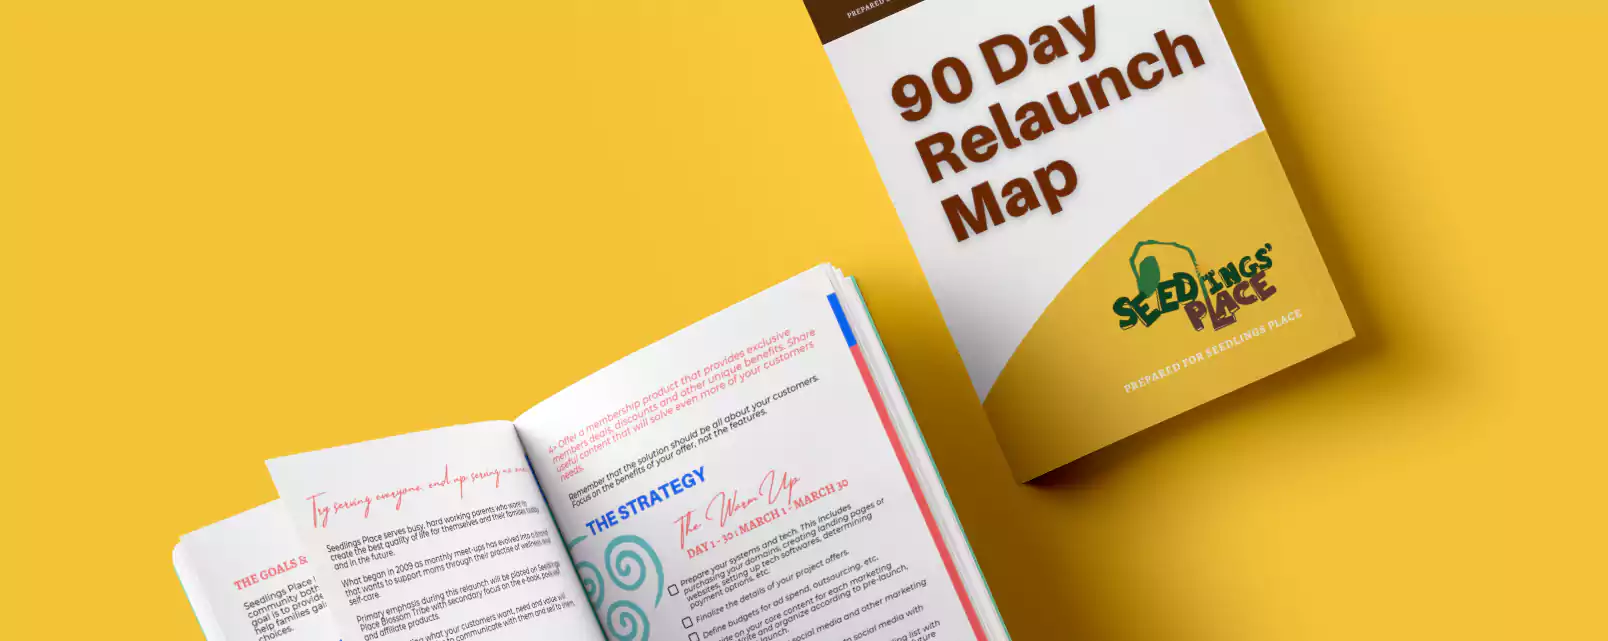 90 Day Relaunch Map